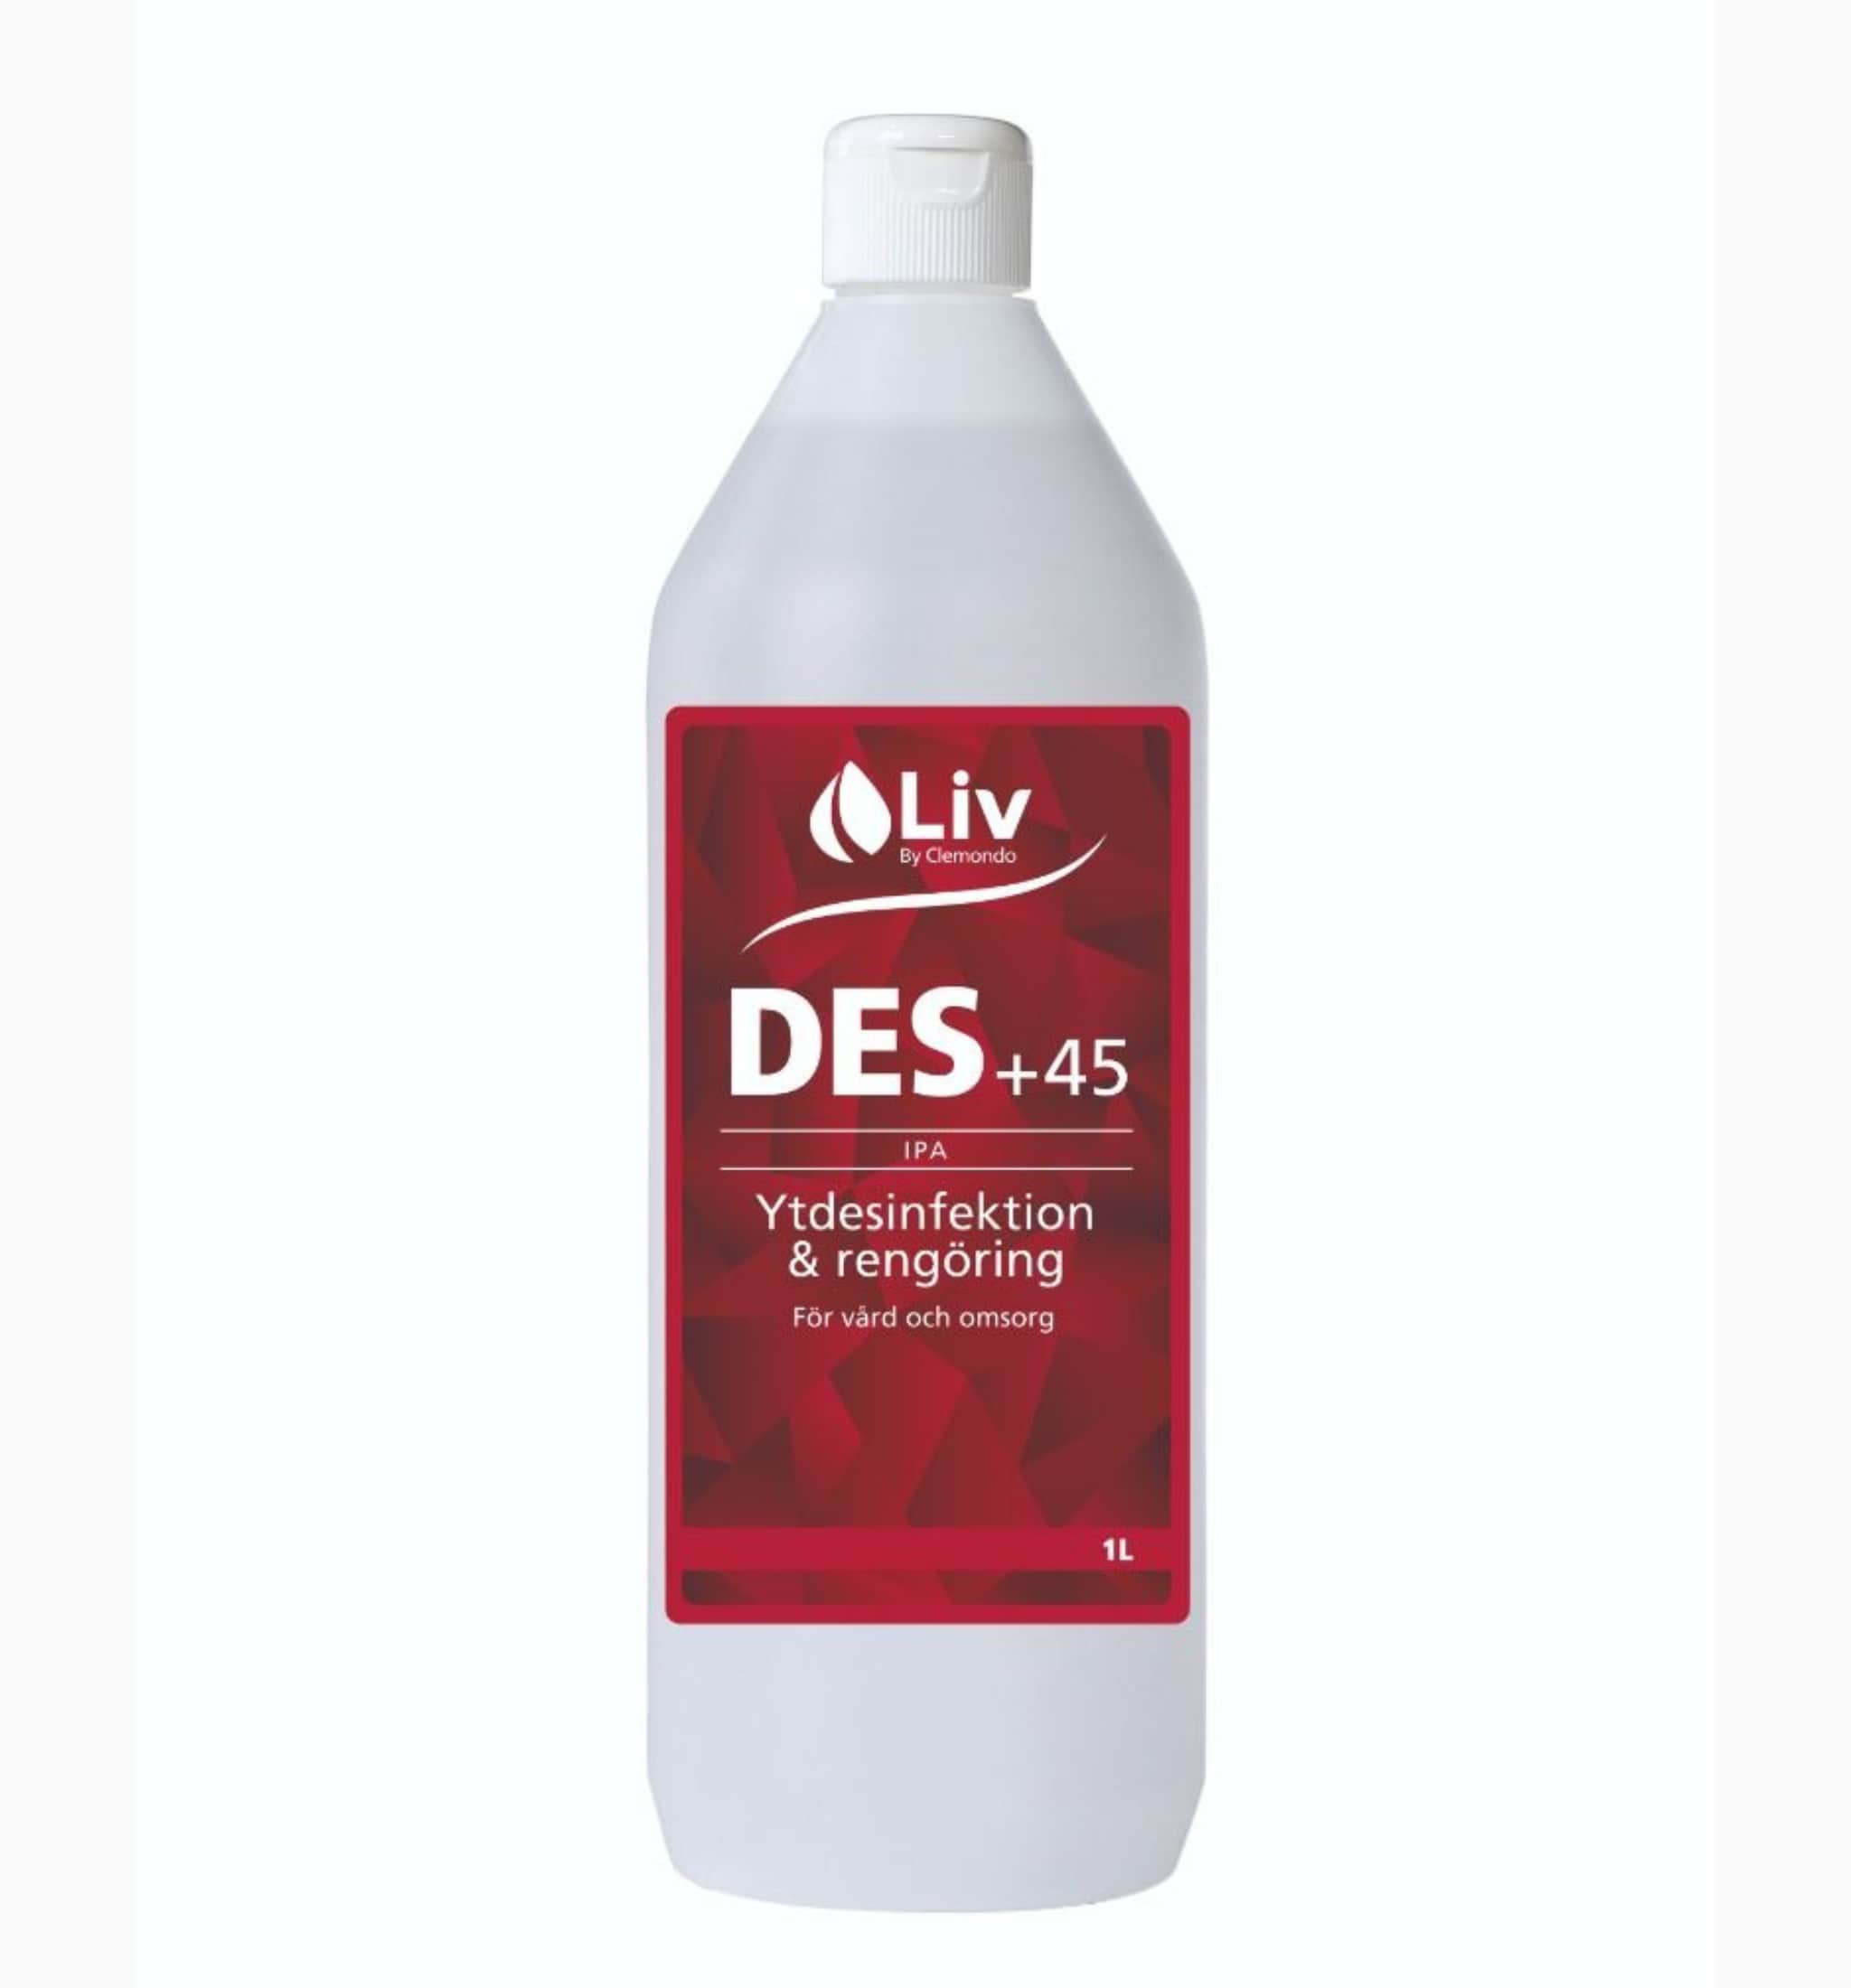 Surface Disinfectant Liv IPA 45%